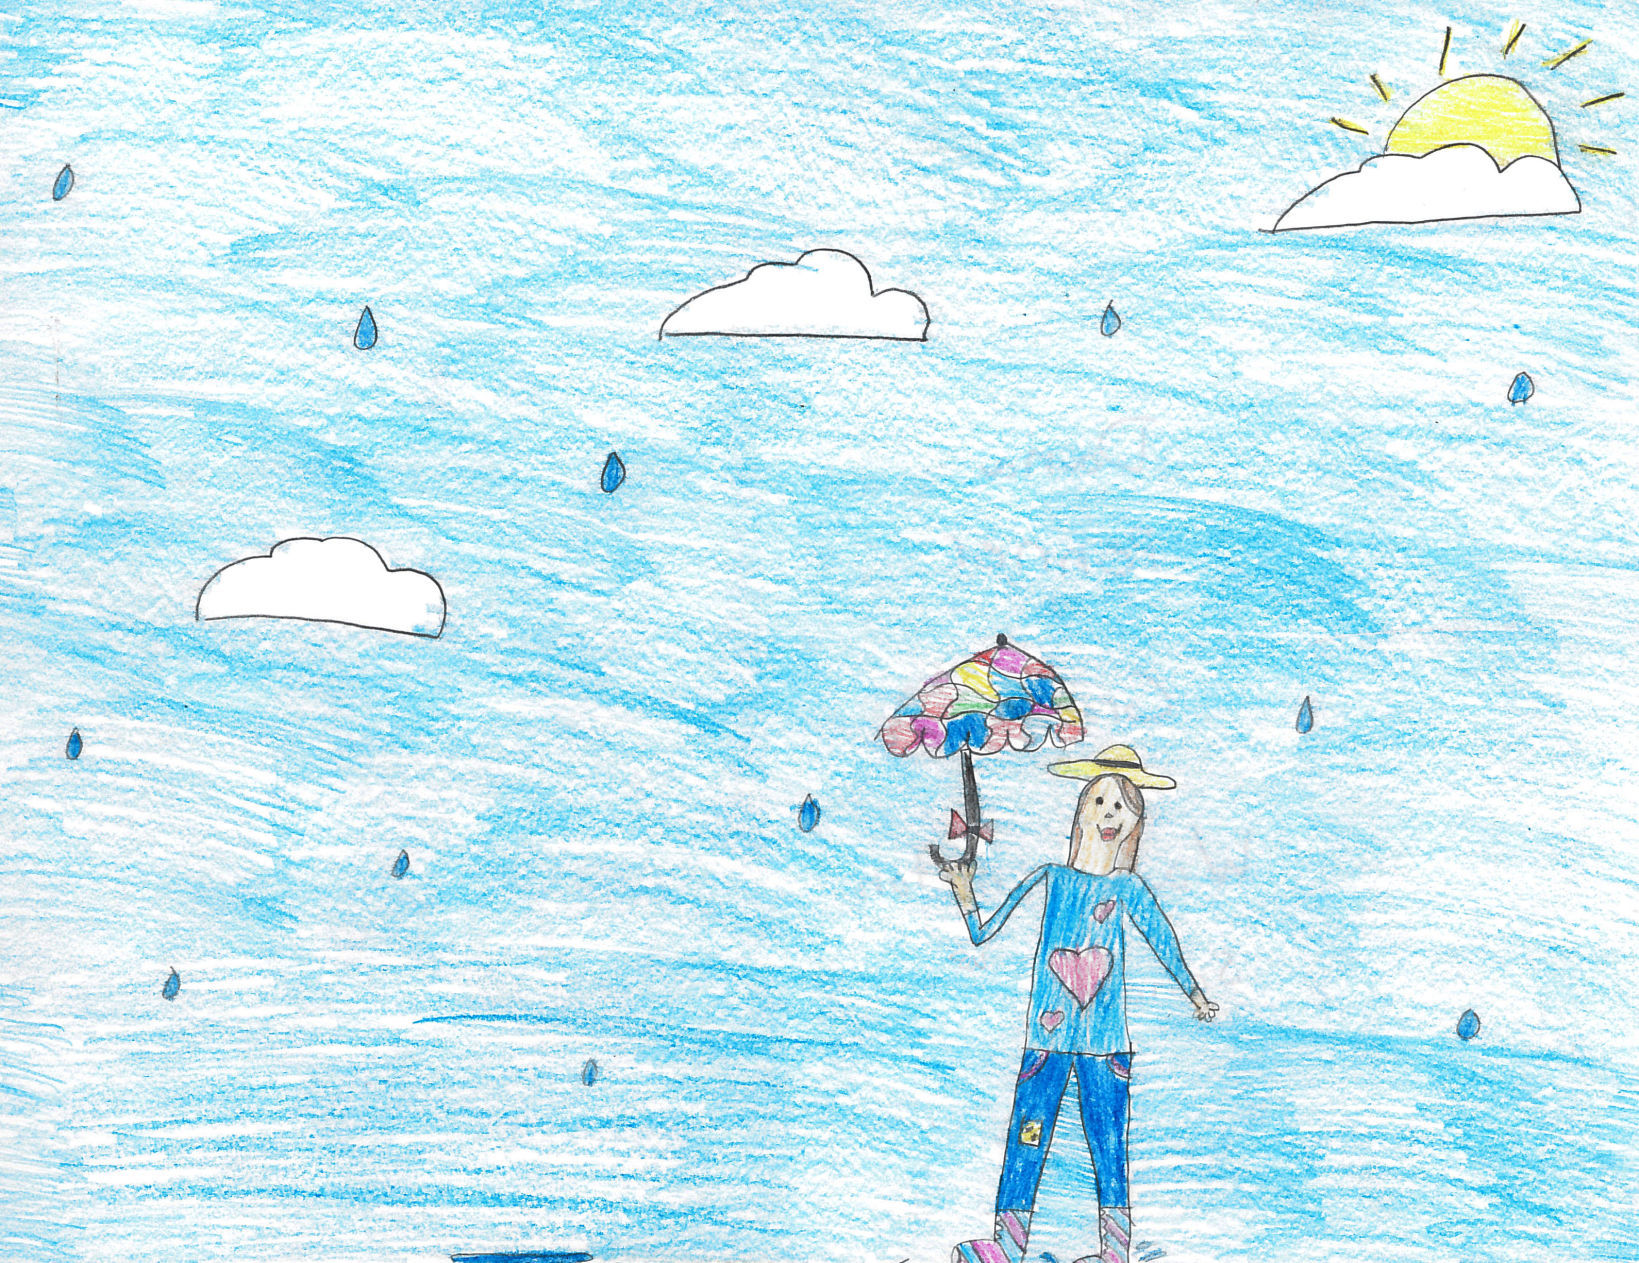 rainy day scene drawing for kids - Clip Art Library